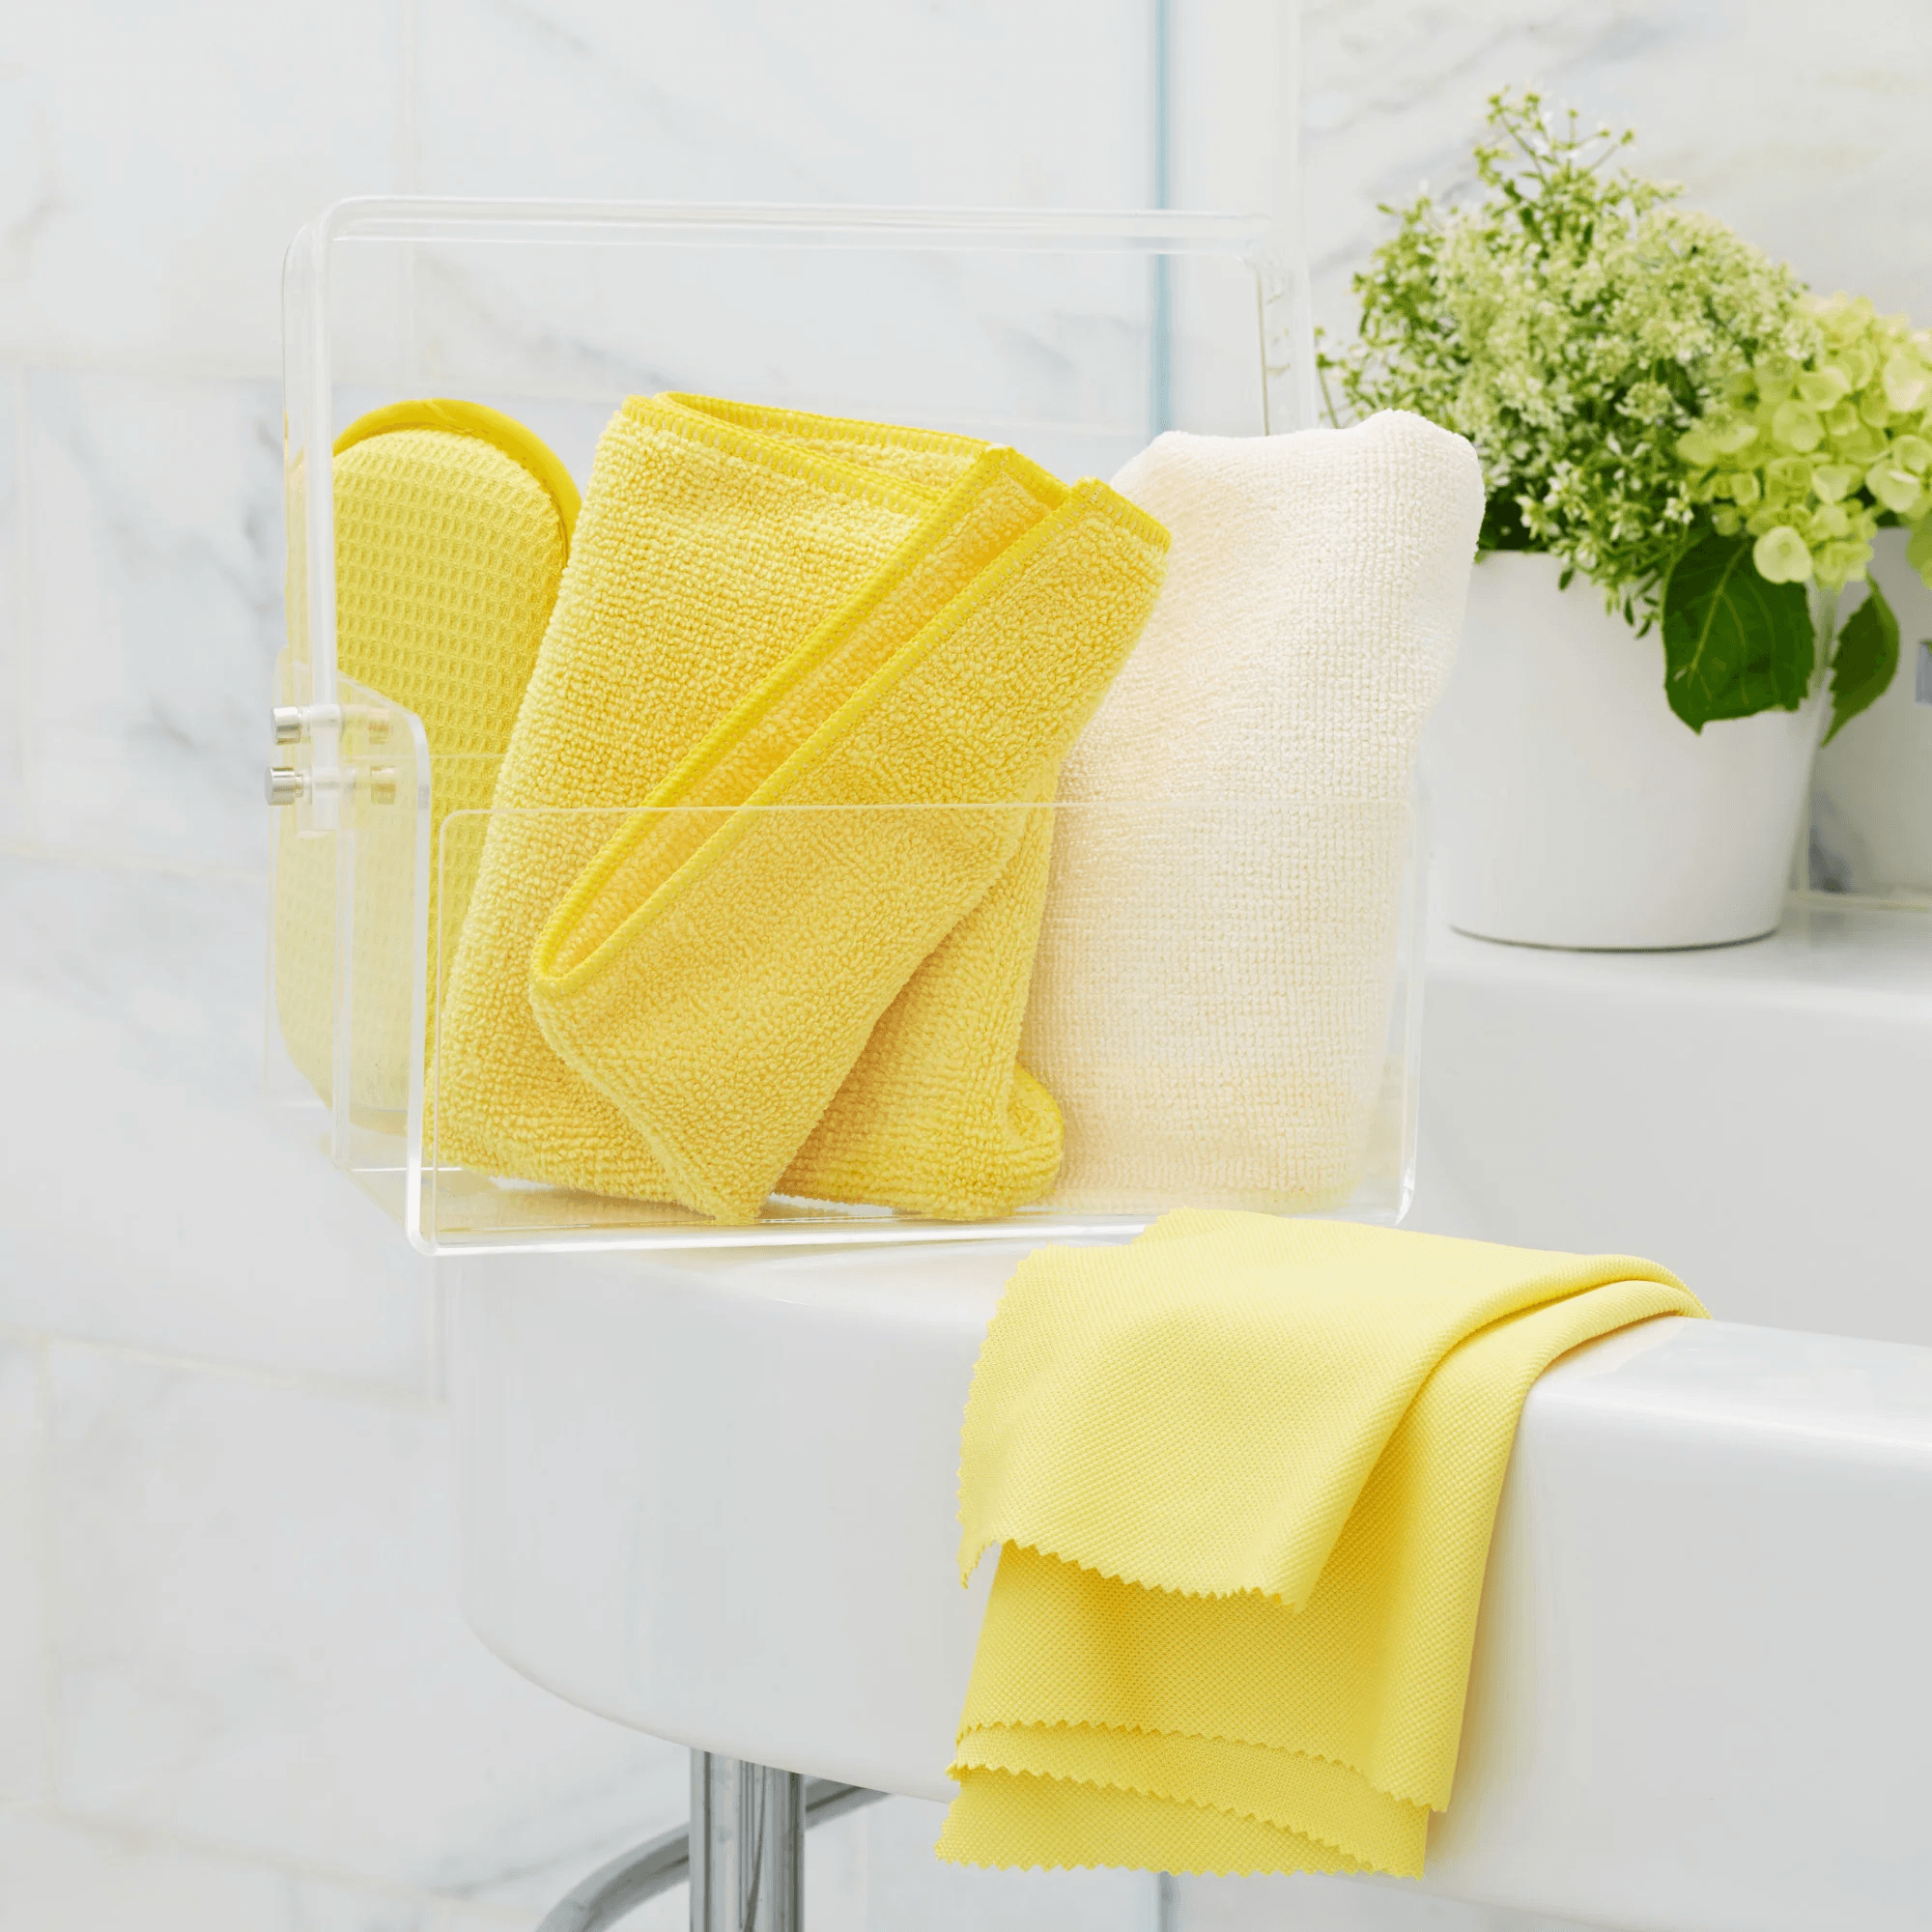 Bathroom Eco Cleaning Cloth Pack